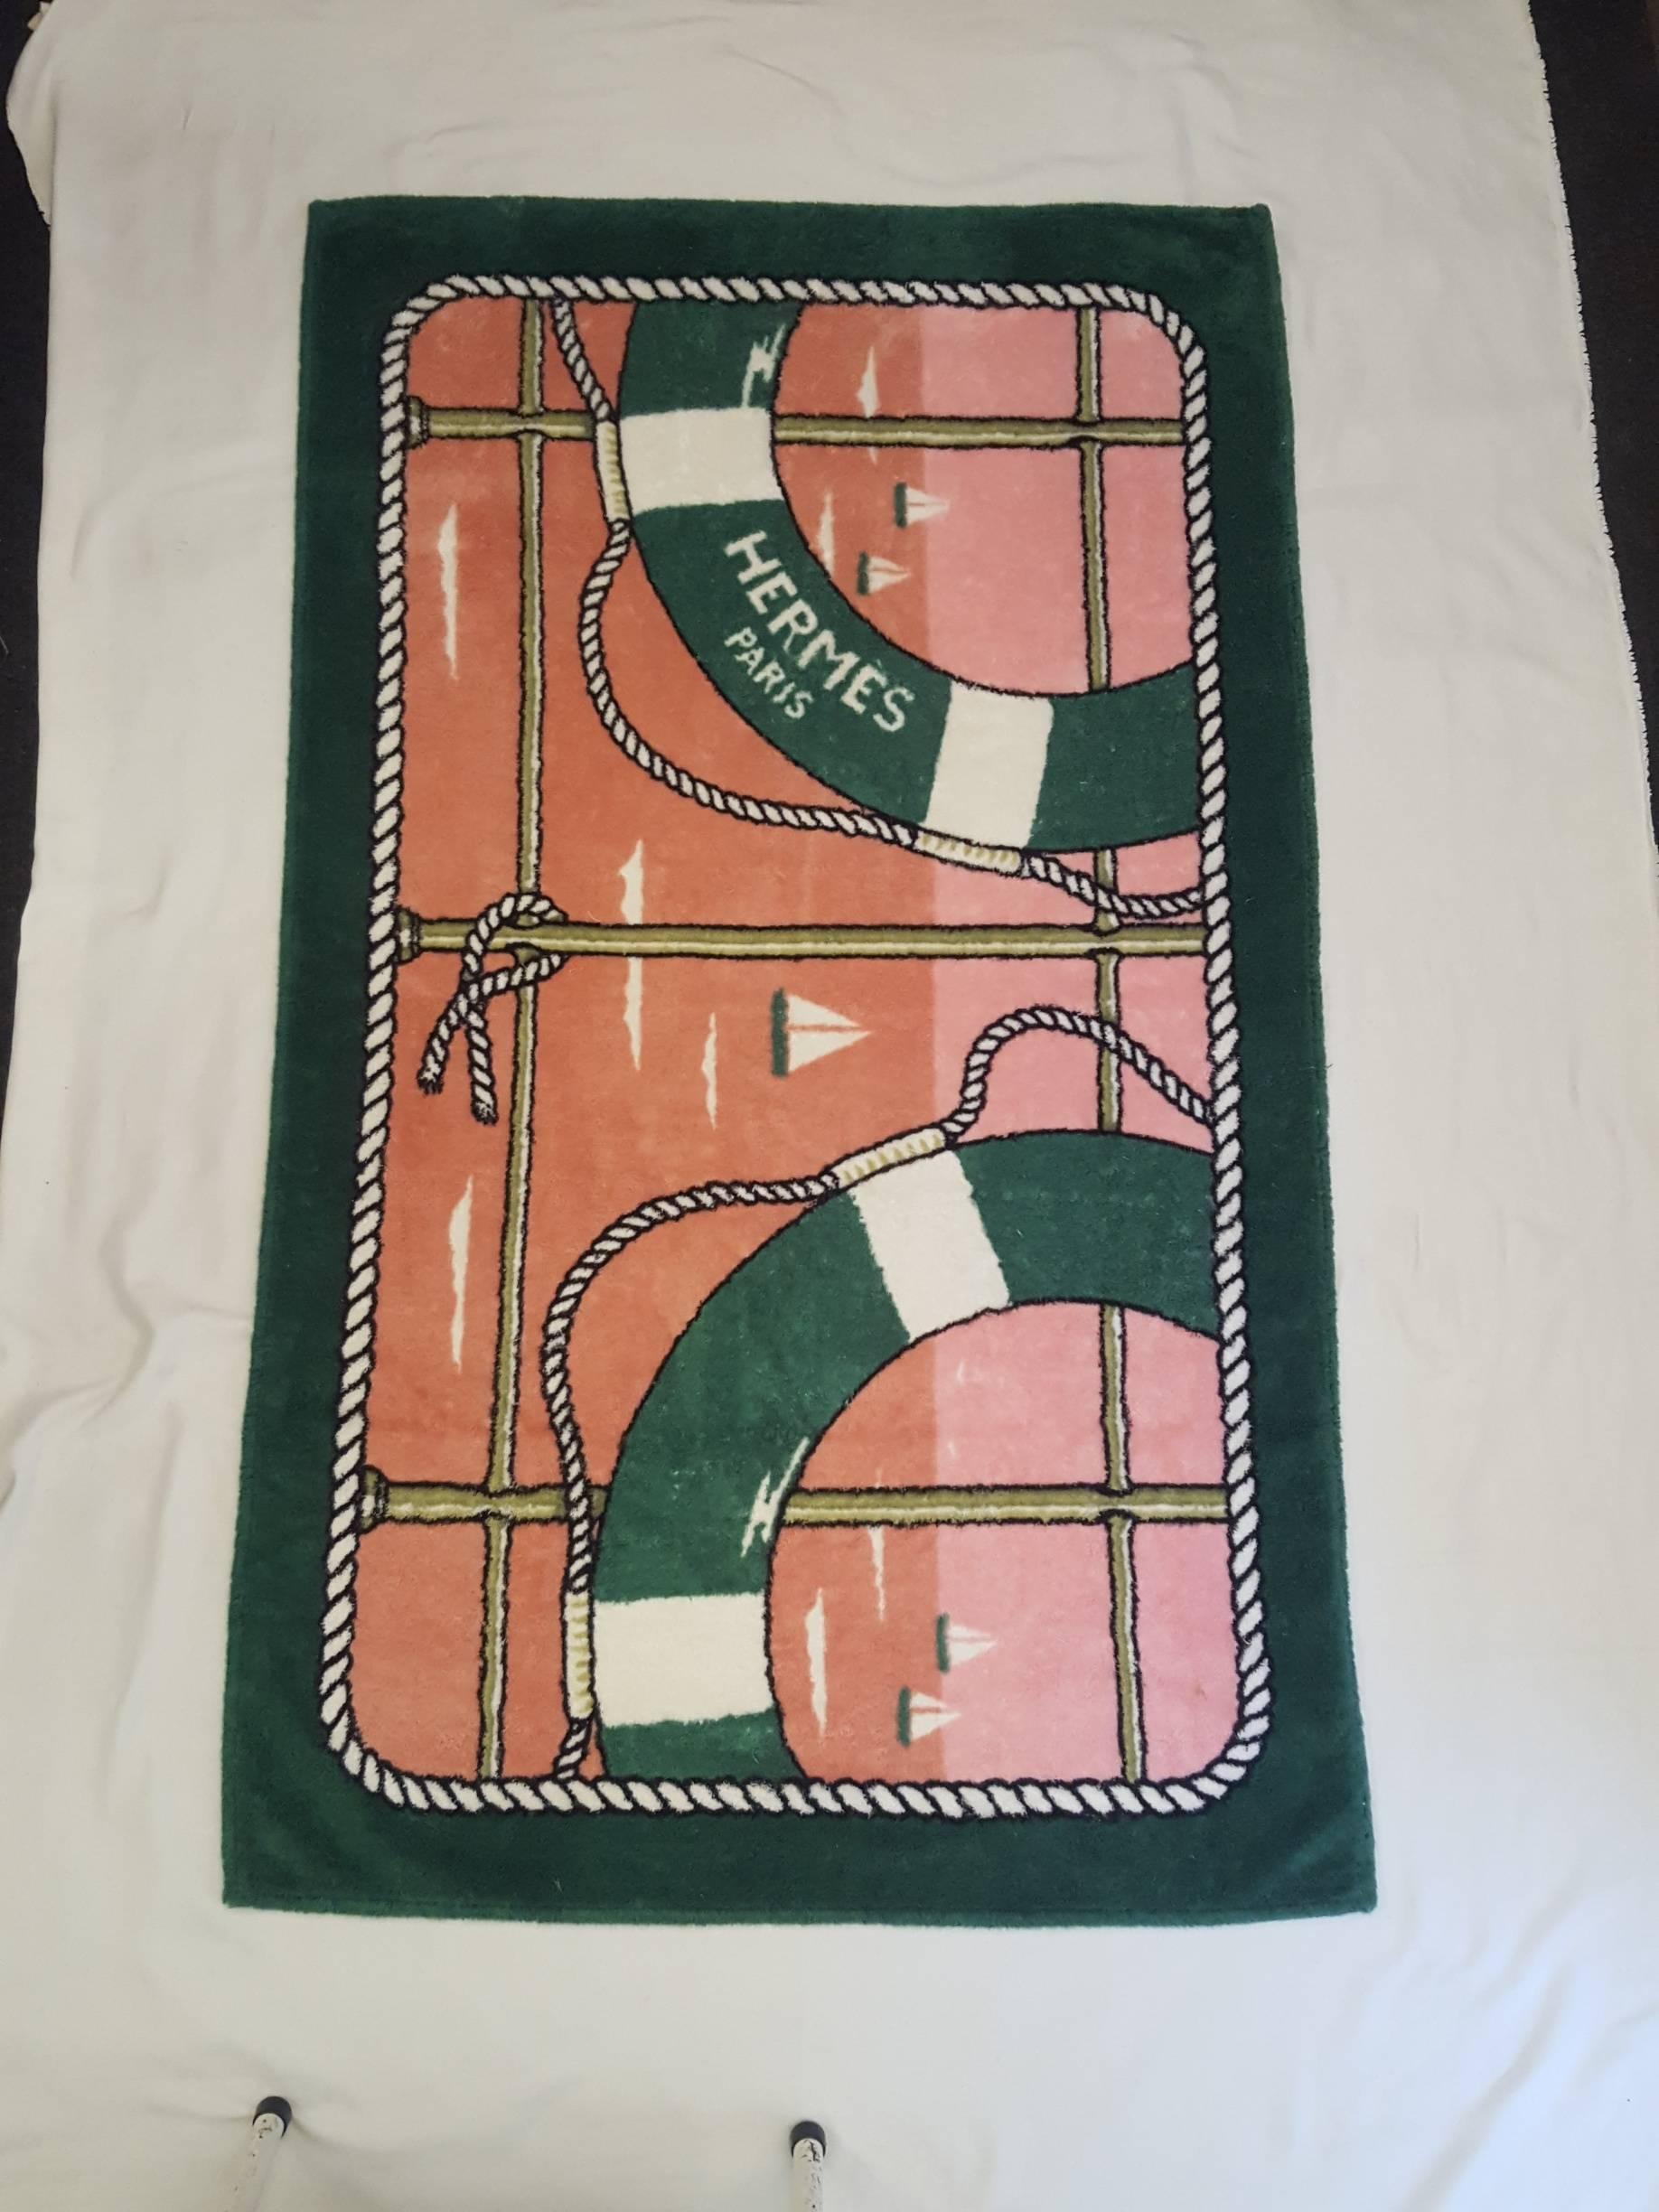 Presenting a rare Hermes Life Preserves Beach Towel that will make a statement on the beach, at a resort, on a cruise, on your yacht or by the pool!  Lush and thirsty 100 cotton!  Colors are lively and ready to be unfurled!  For lovers of all things